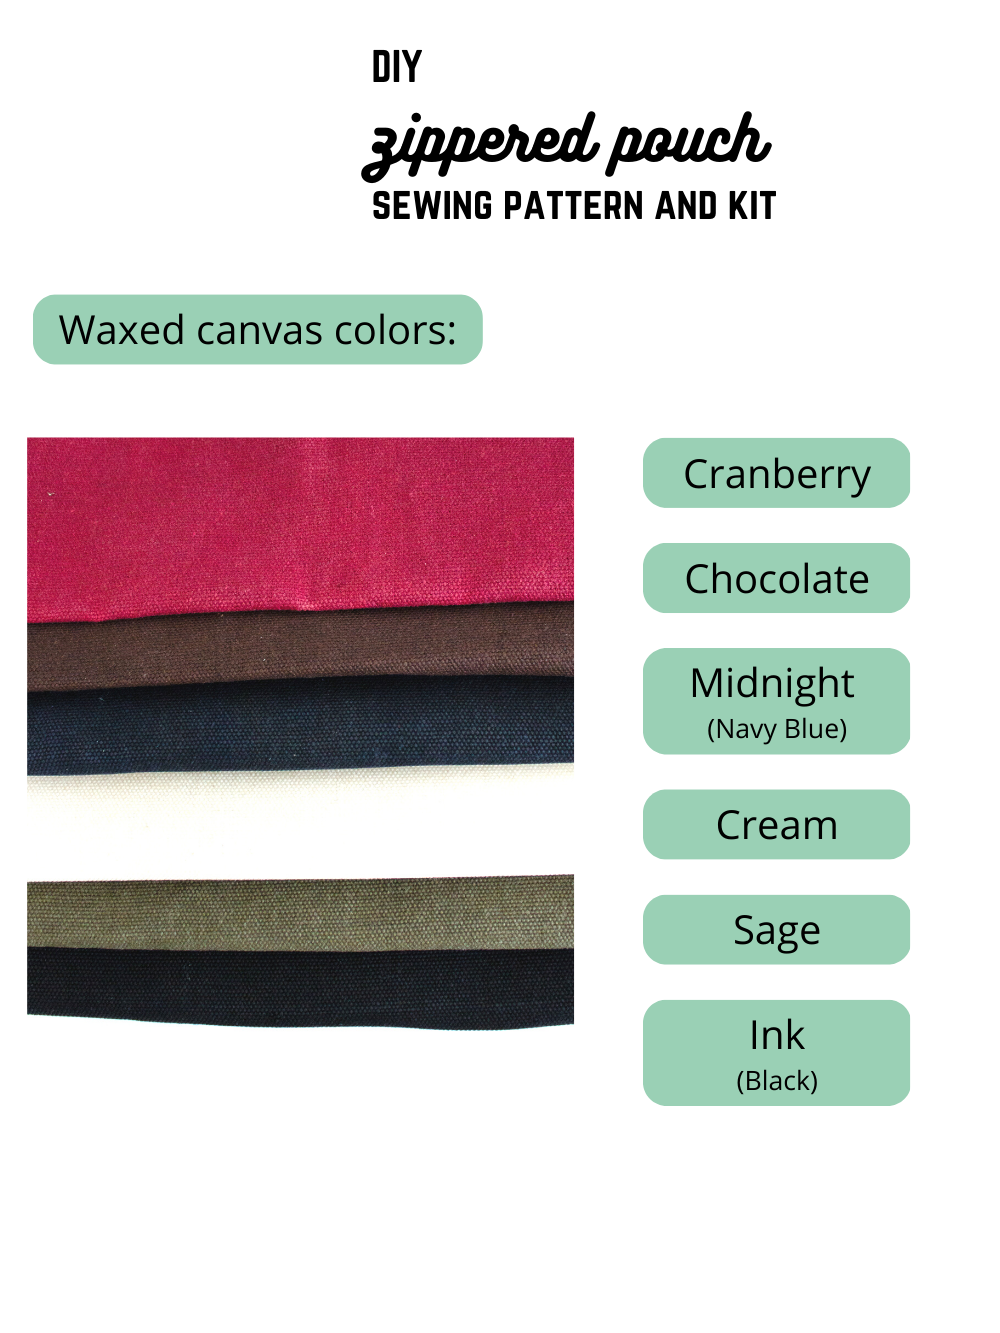 DIY zippered pouch sewing pattern and kit. Waxed canvas colors: cranberry (red), chocolate (dark brown), midnight (navy blue), cream, sage, and ink (black). 